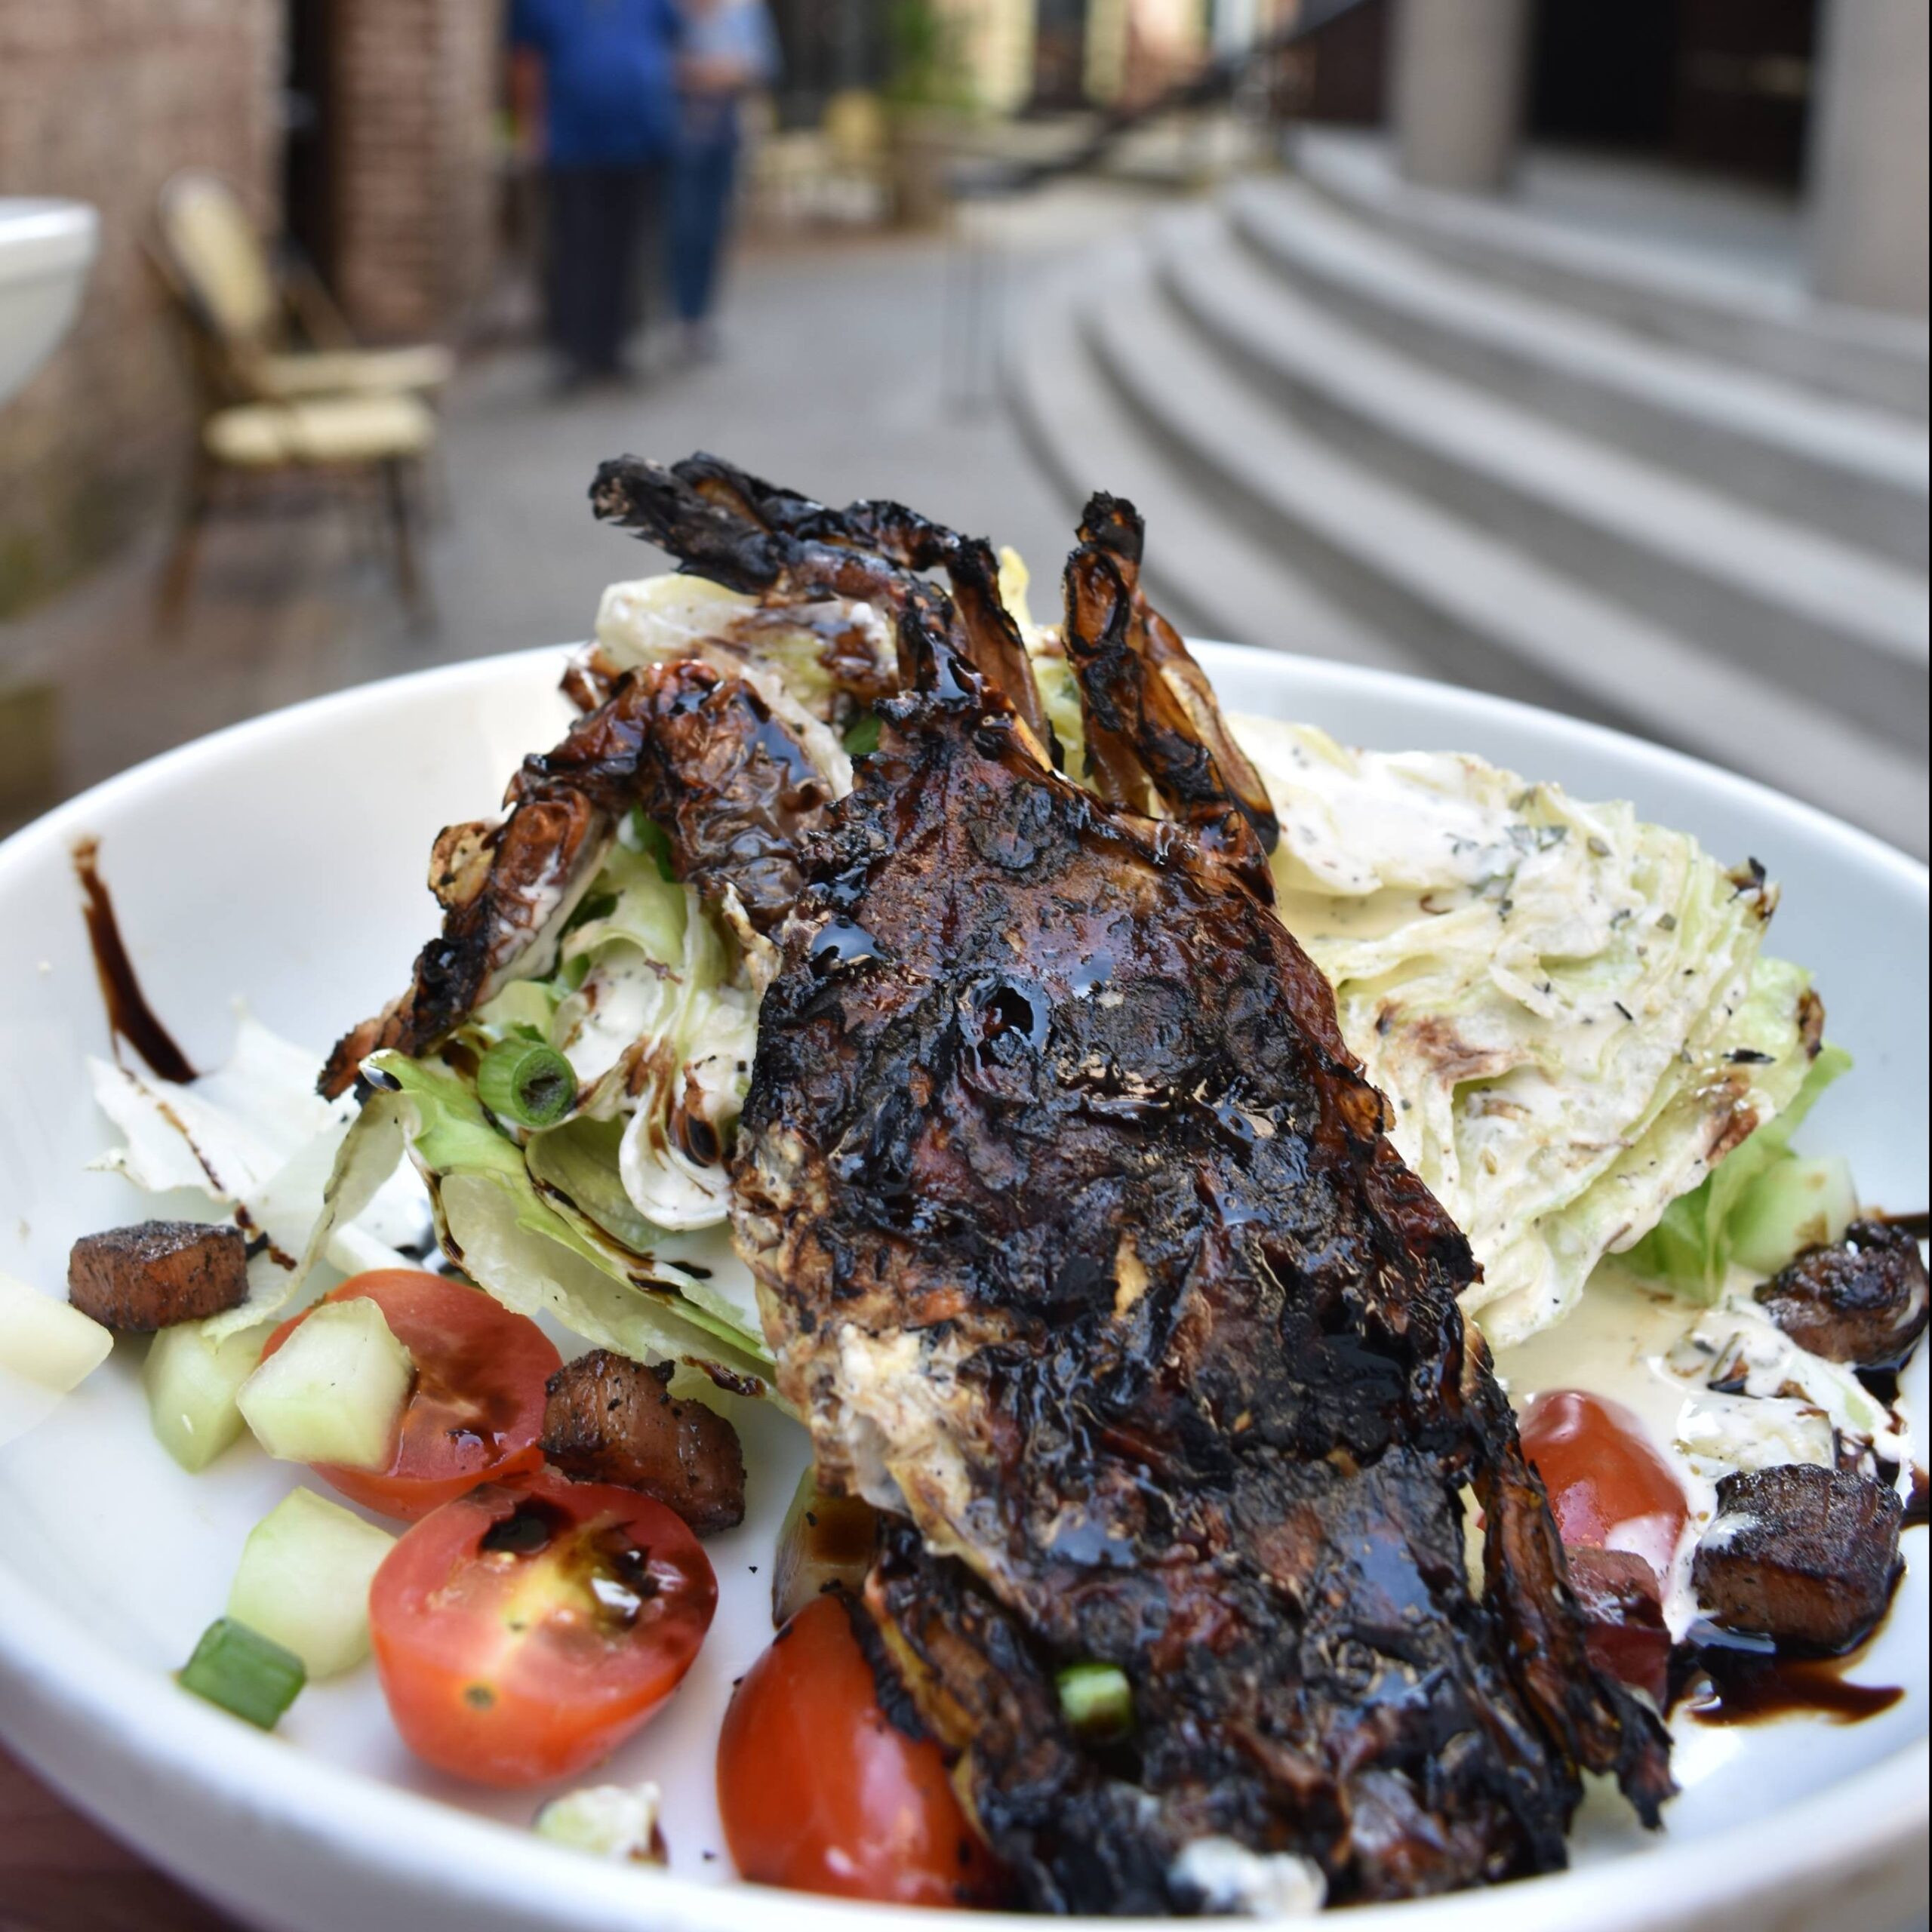 Grilled Soft shell crab with wedge salad